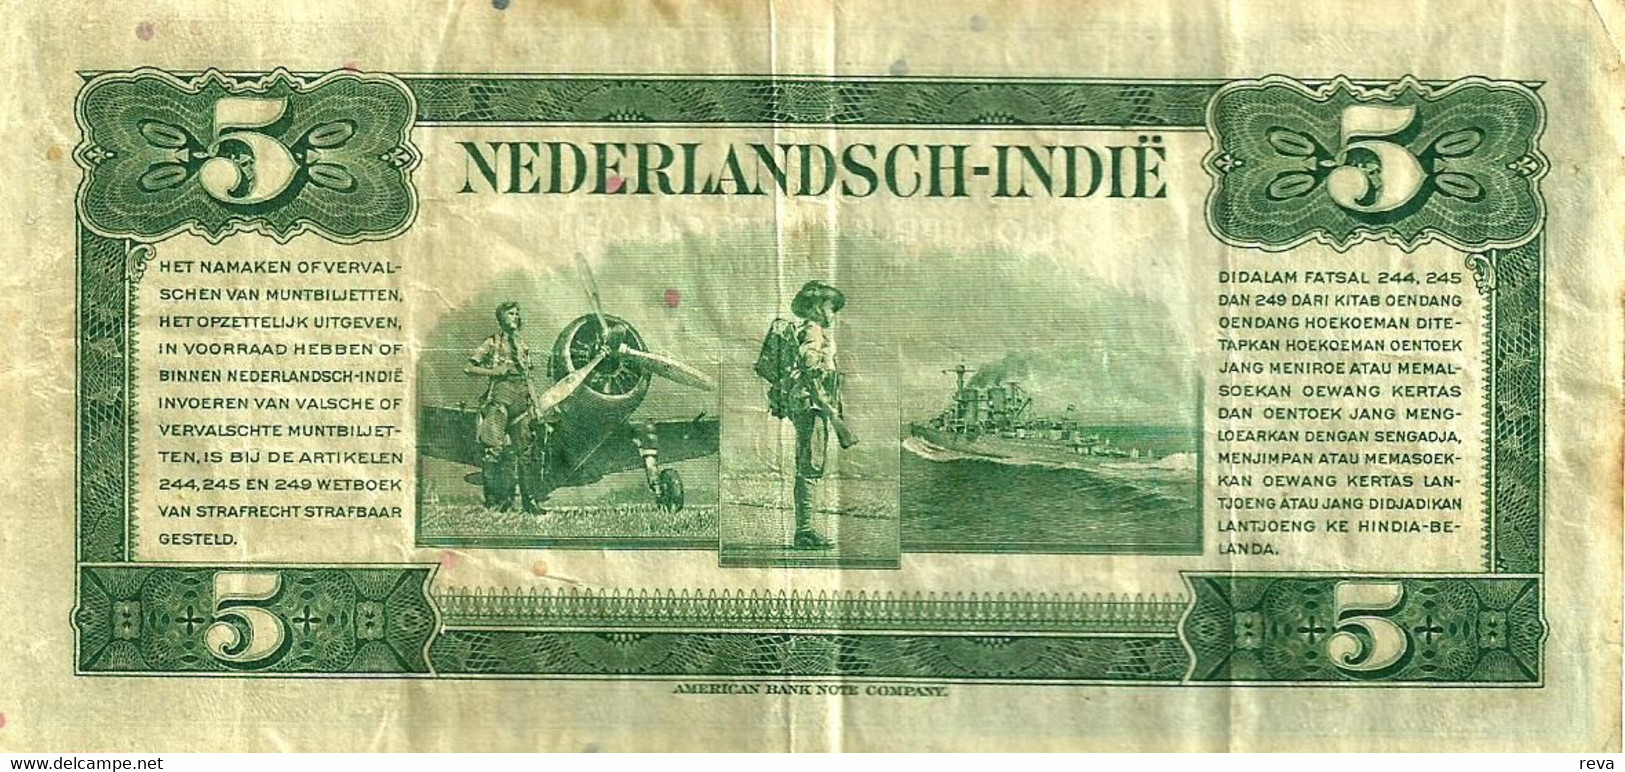 NETHERLANDS EAST INDIES 5 GULDEN BLUE WOMAN FRONT AIRPLANE SHIP BACK 02-03-1943 P.113 VF READ DESCRIPTION CAREFULLY !!! - Andere - Azië